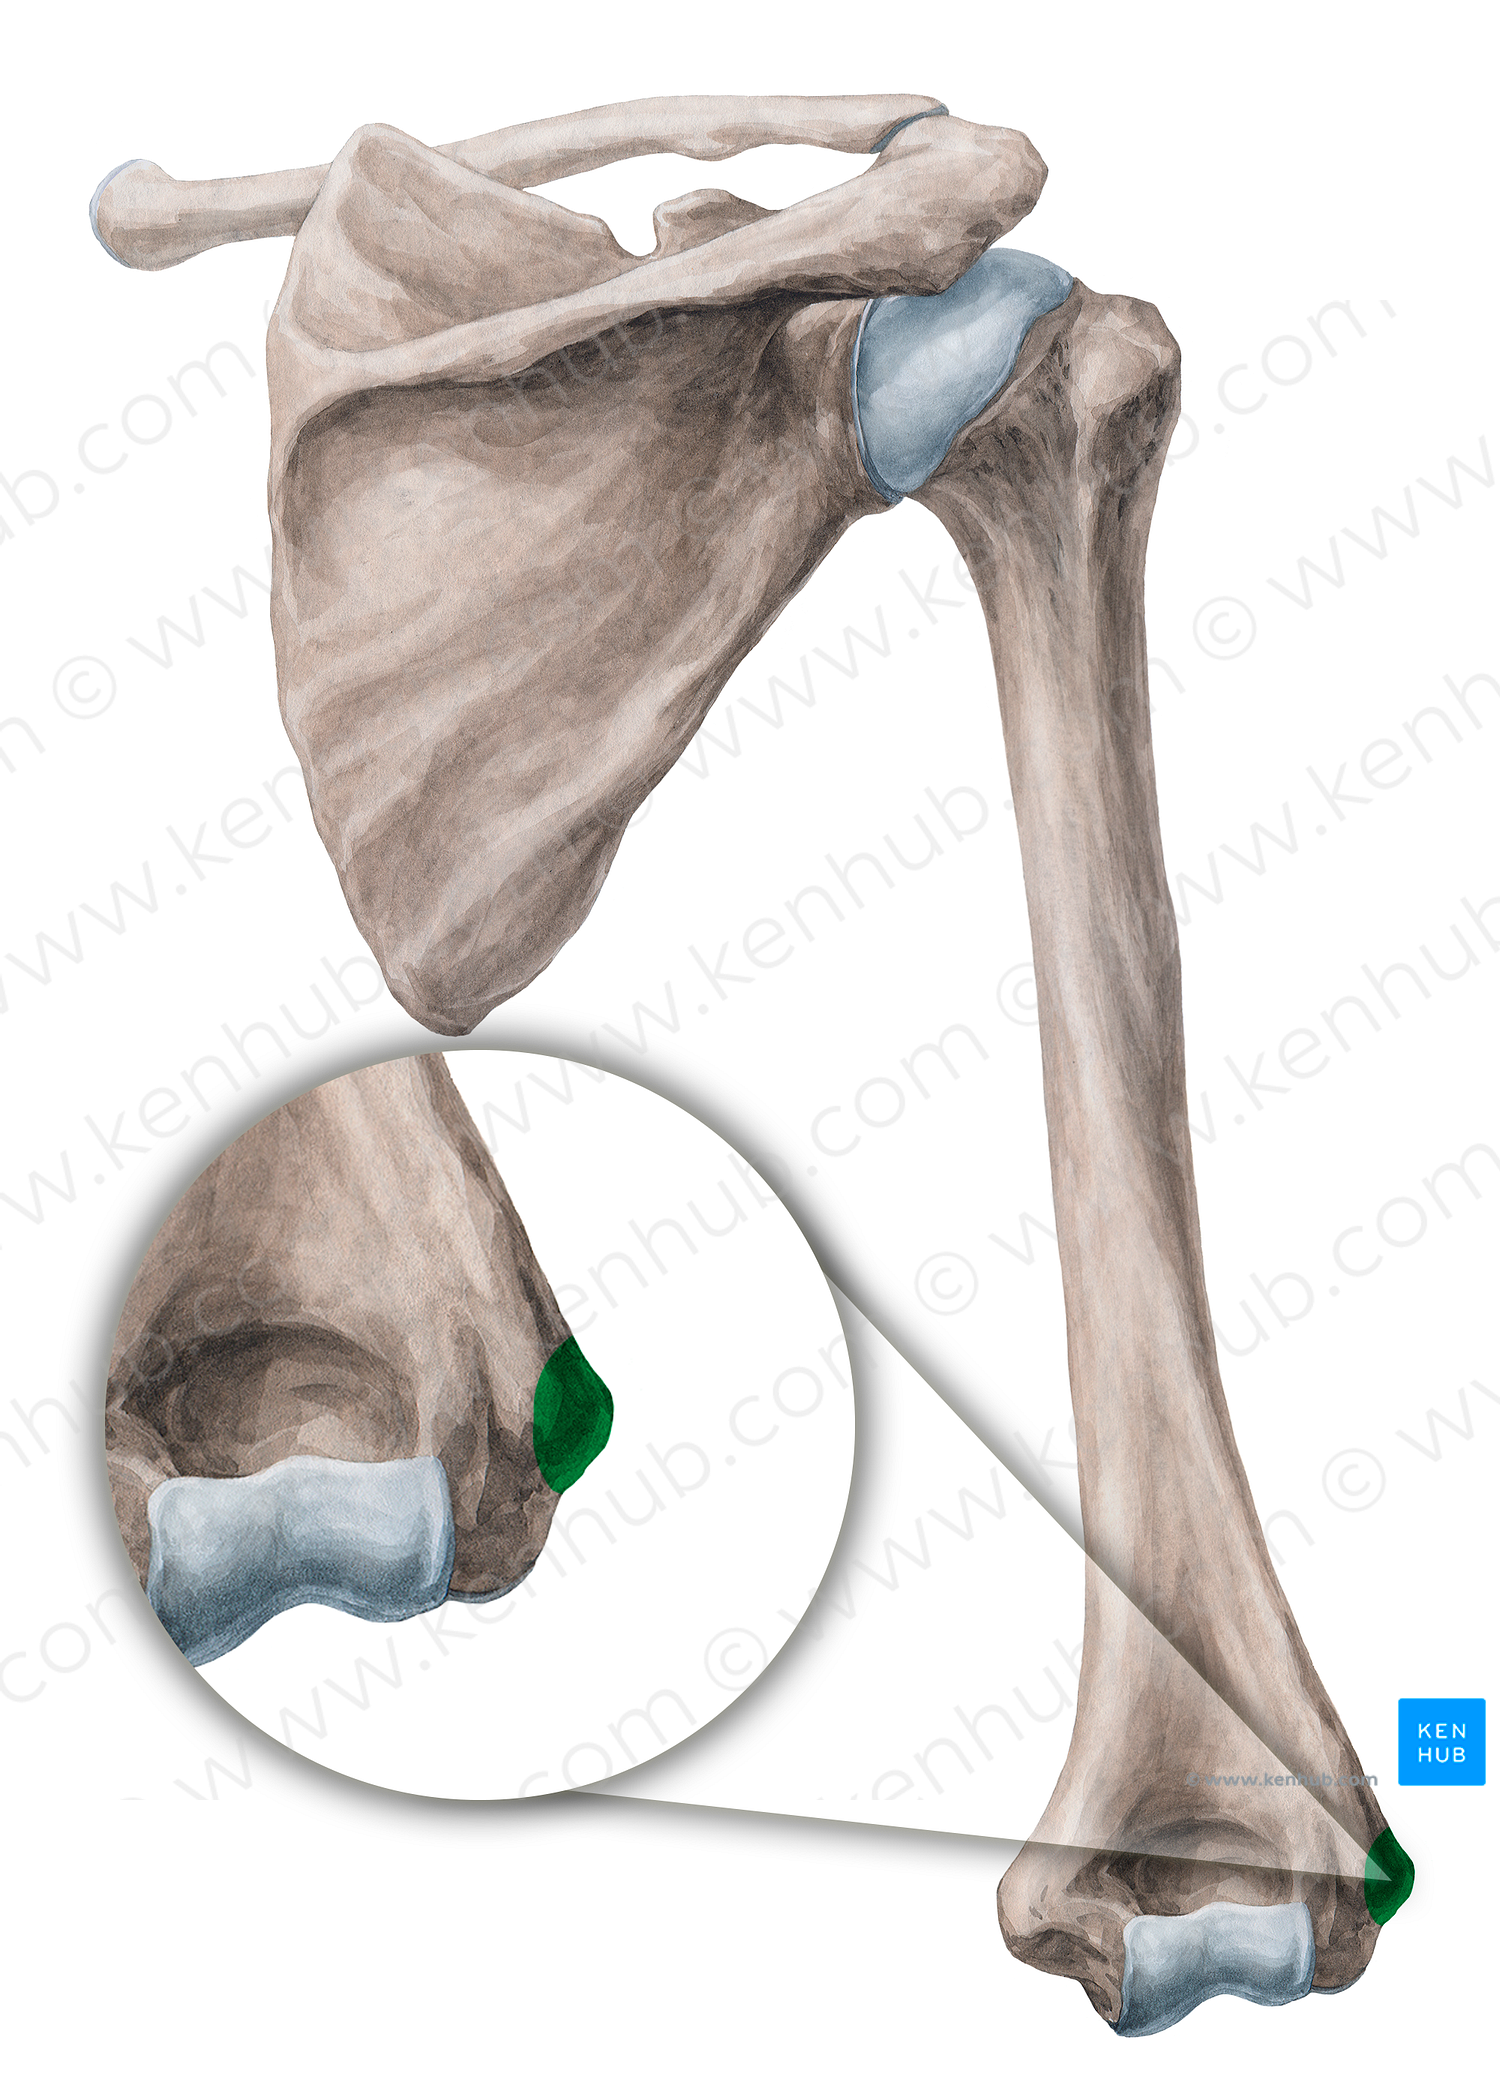 Lateral epicondyle of humerus (#3398)